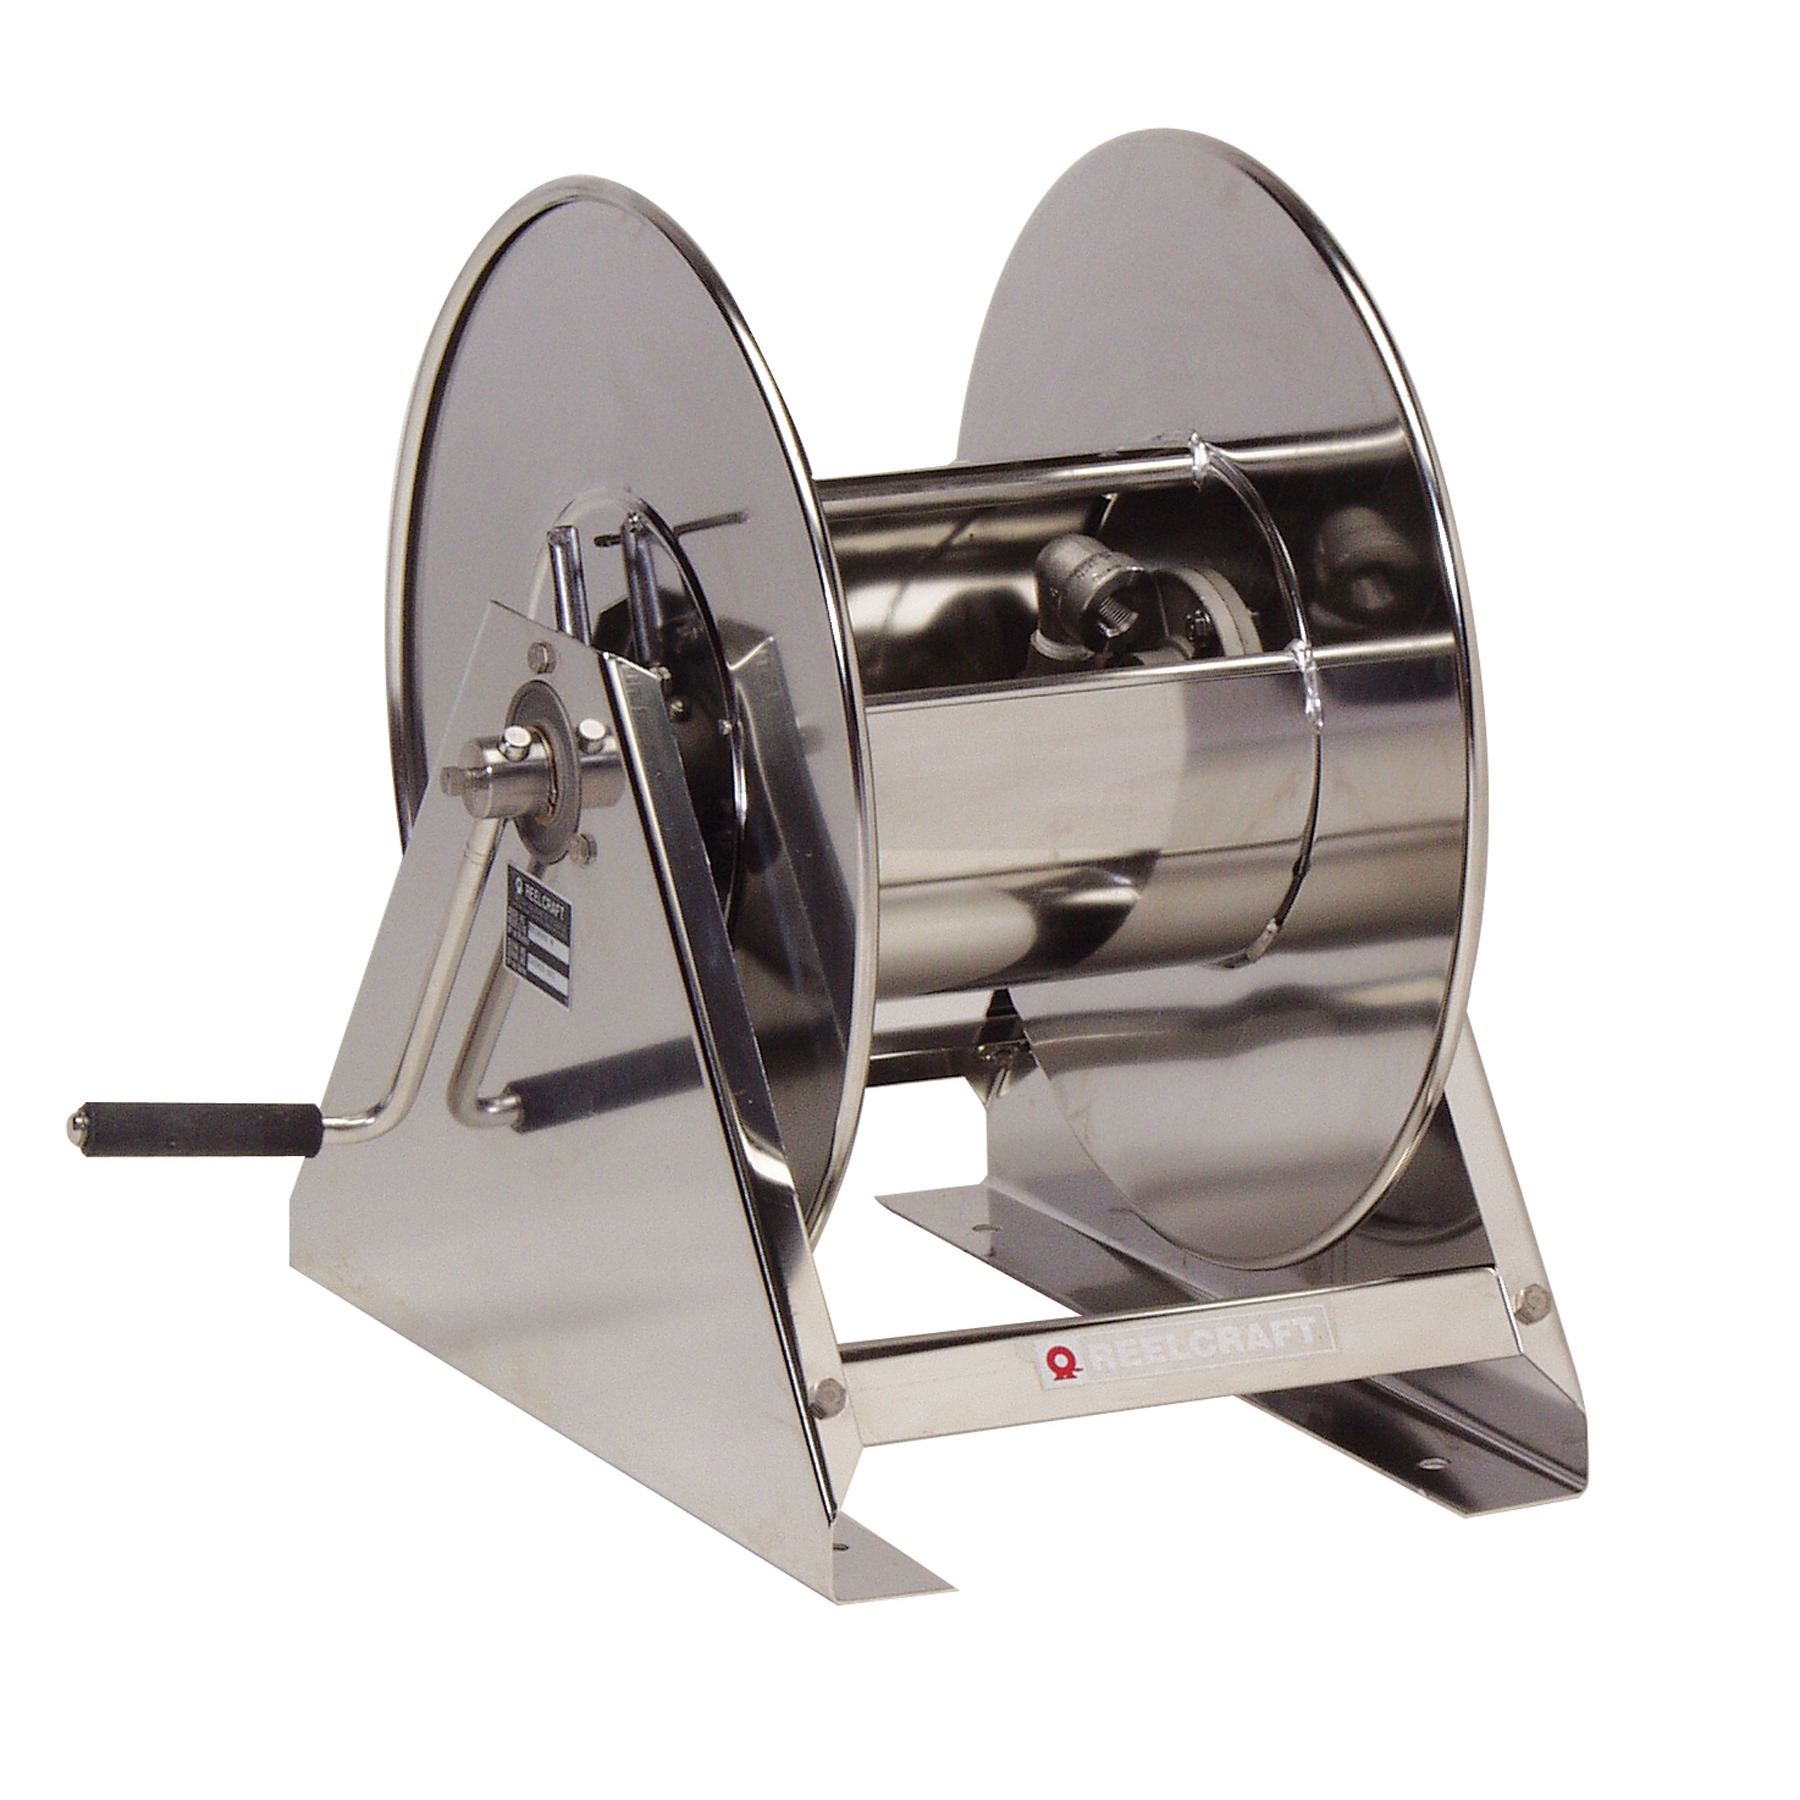 Stainless steel retractable hose reel, Commercial grade